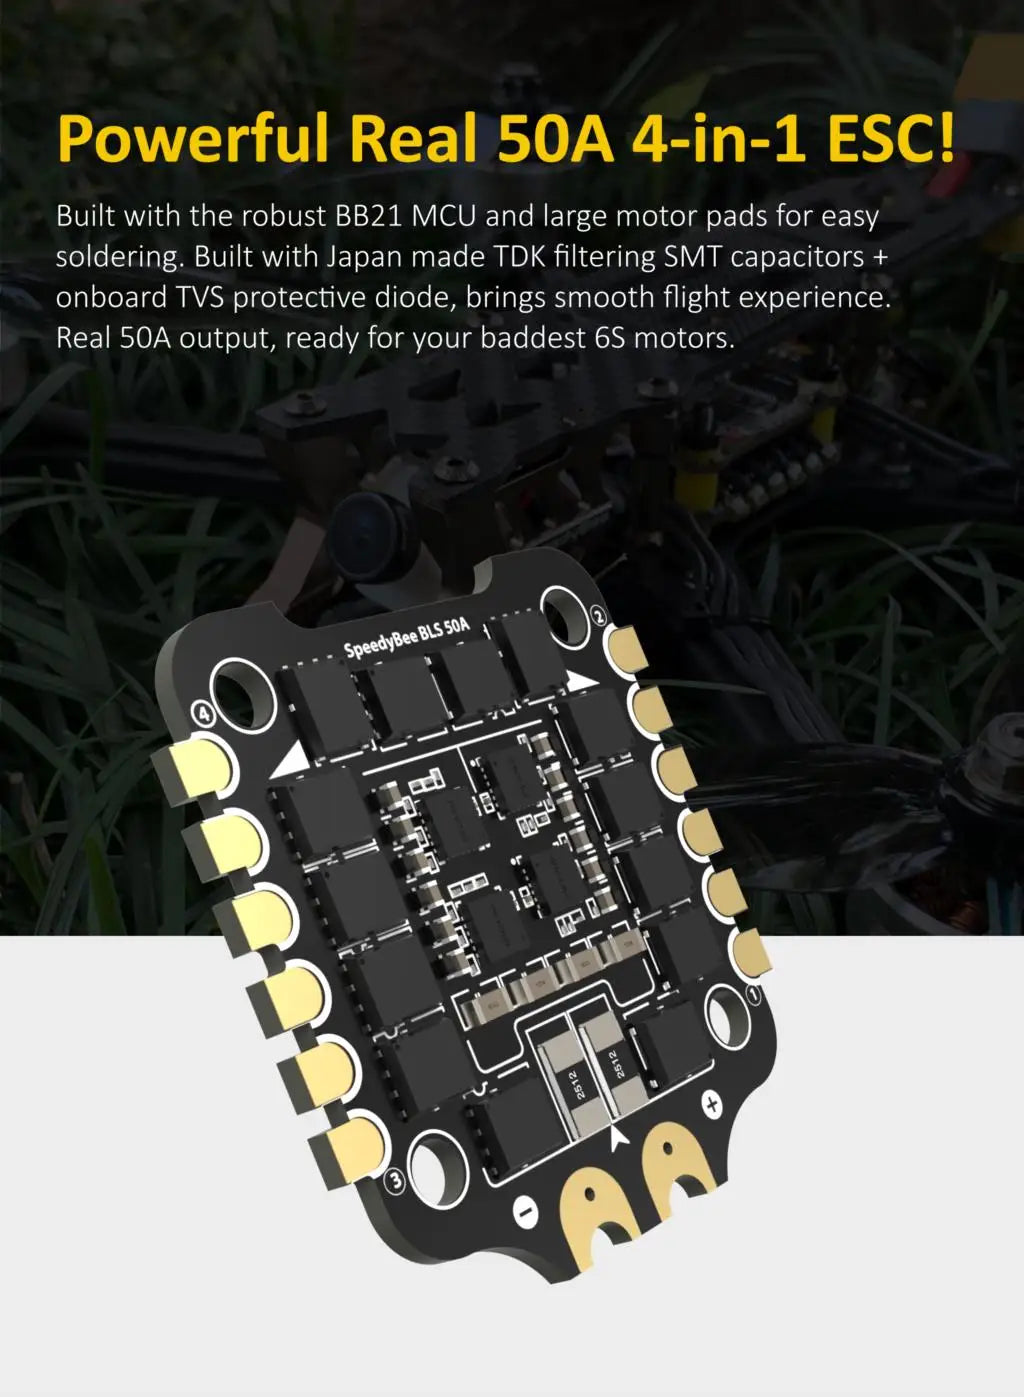 SpeedyBee F405 V3, Built with the robust BB21 MCU and large motor pads for easy soldering 